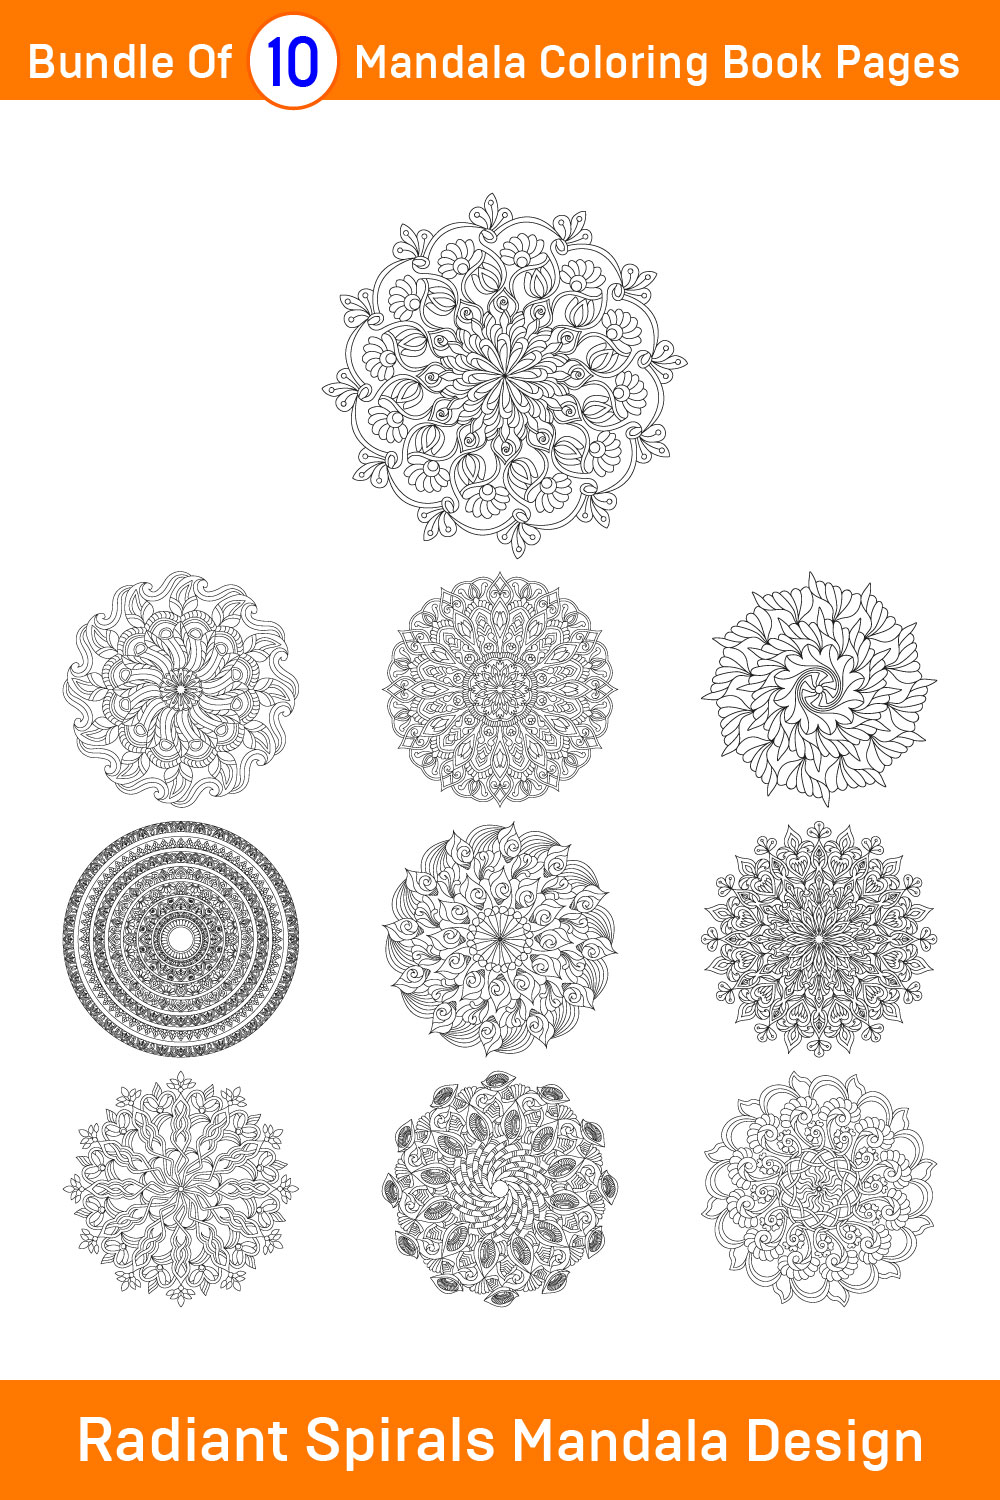 Bundle of 10 Radiant Spirals Mandala Coloring Book Pages pinterest preview image.